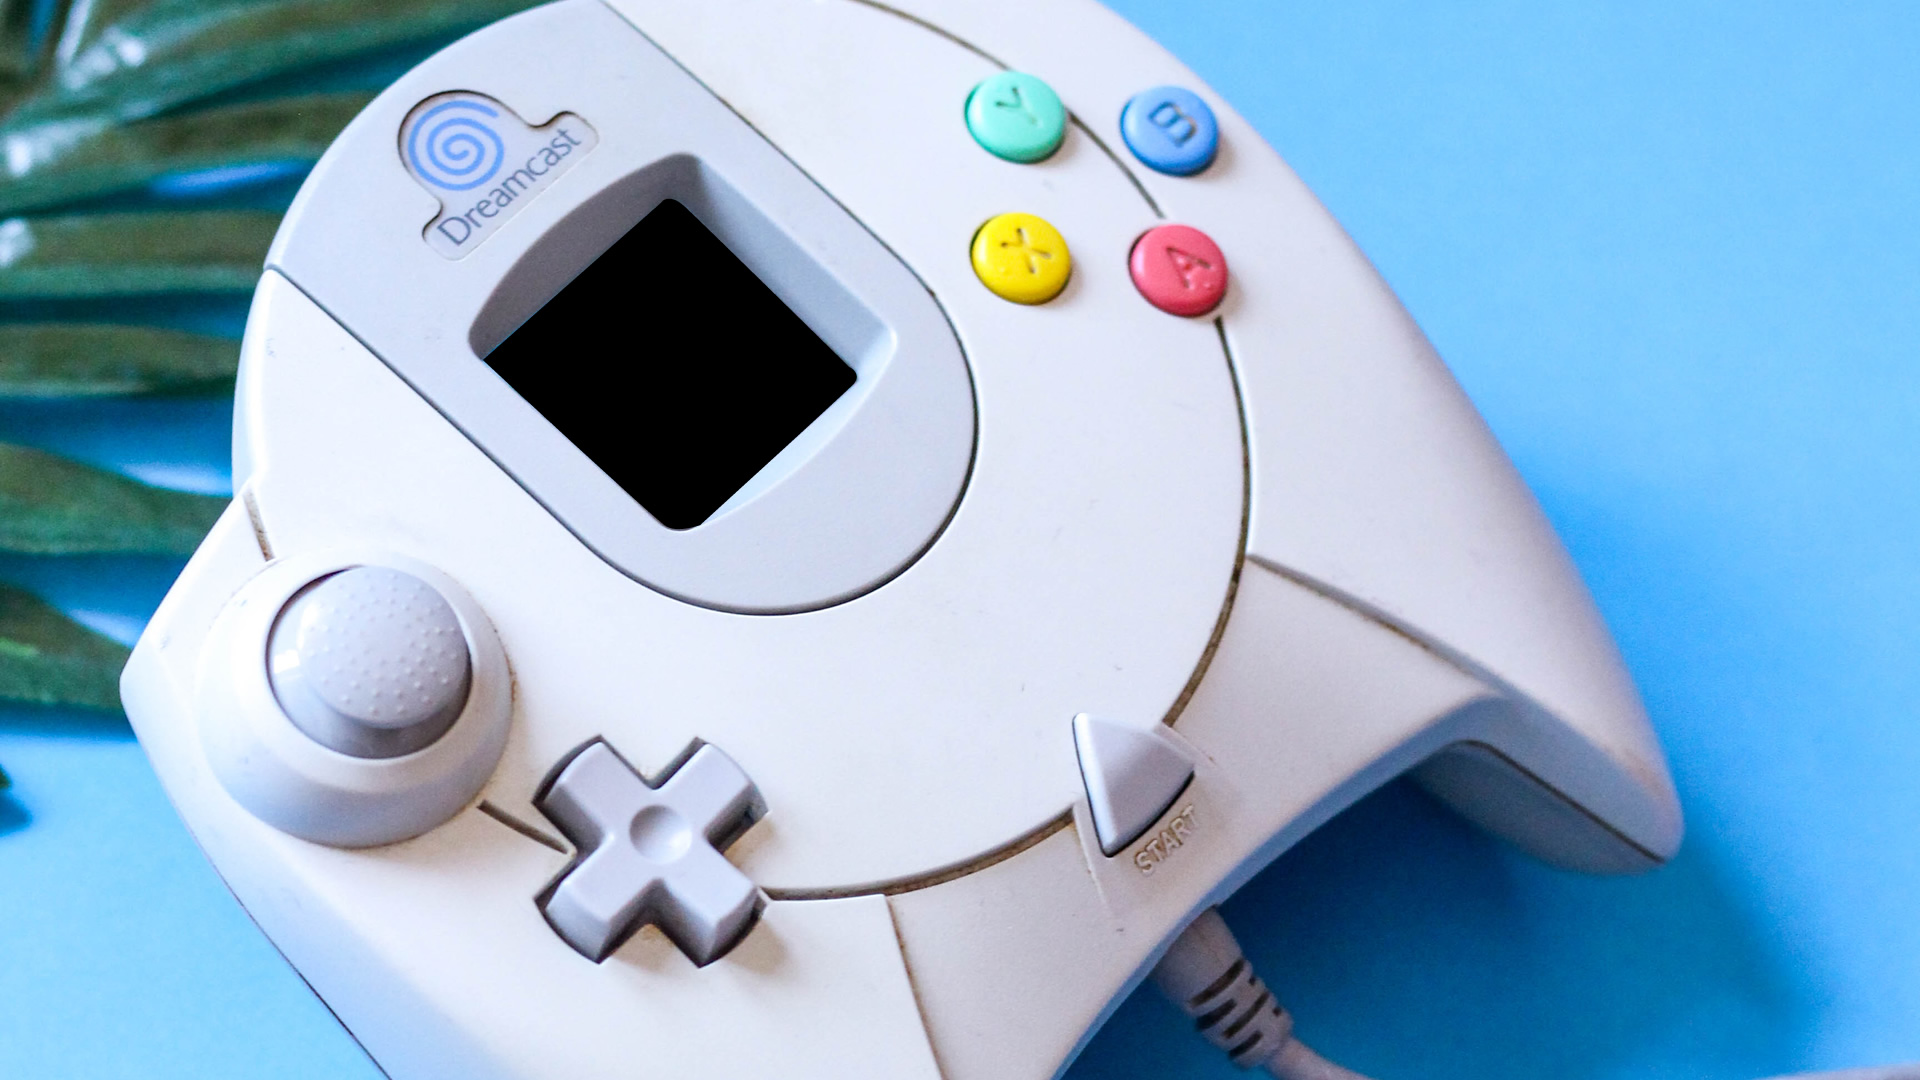 Dreamcast 20th Birthday: Top 5 Dreamcast Games